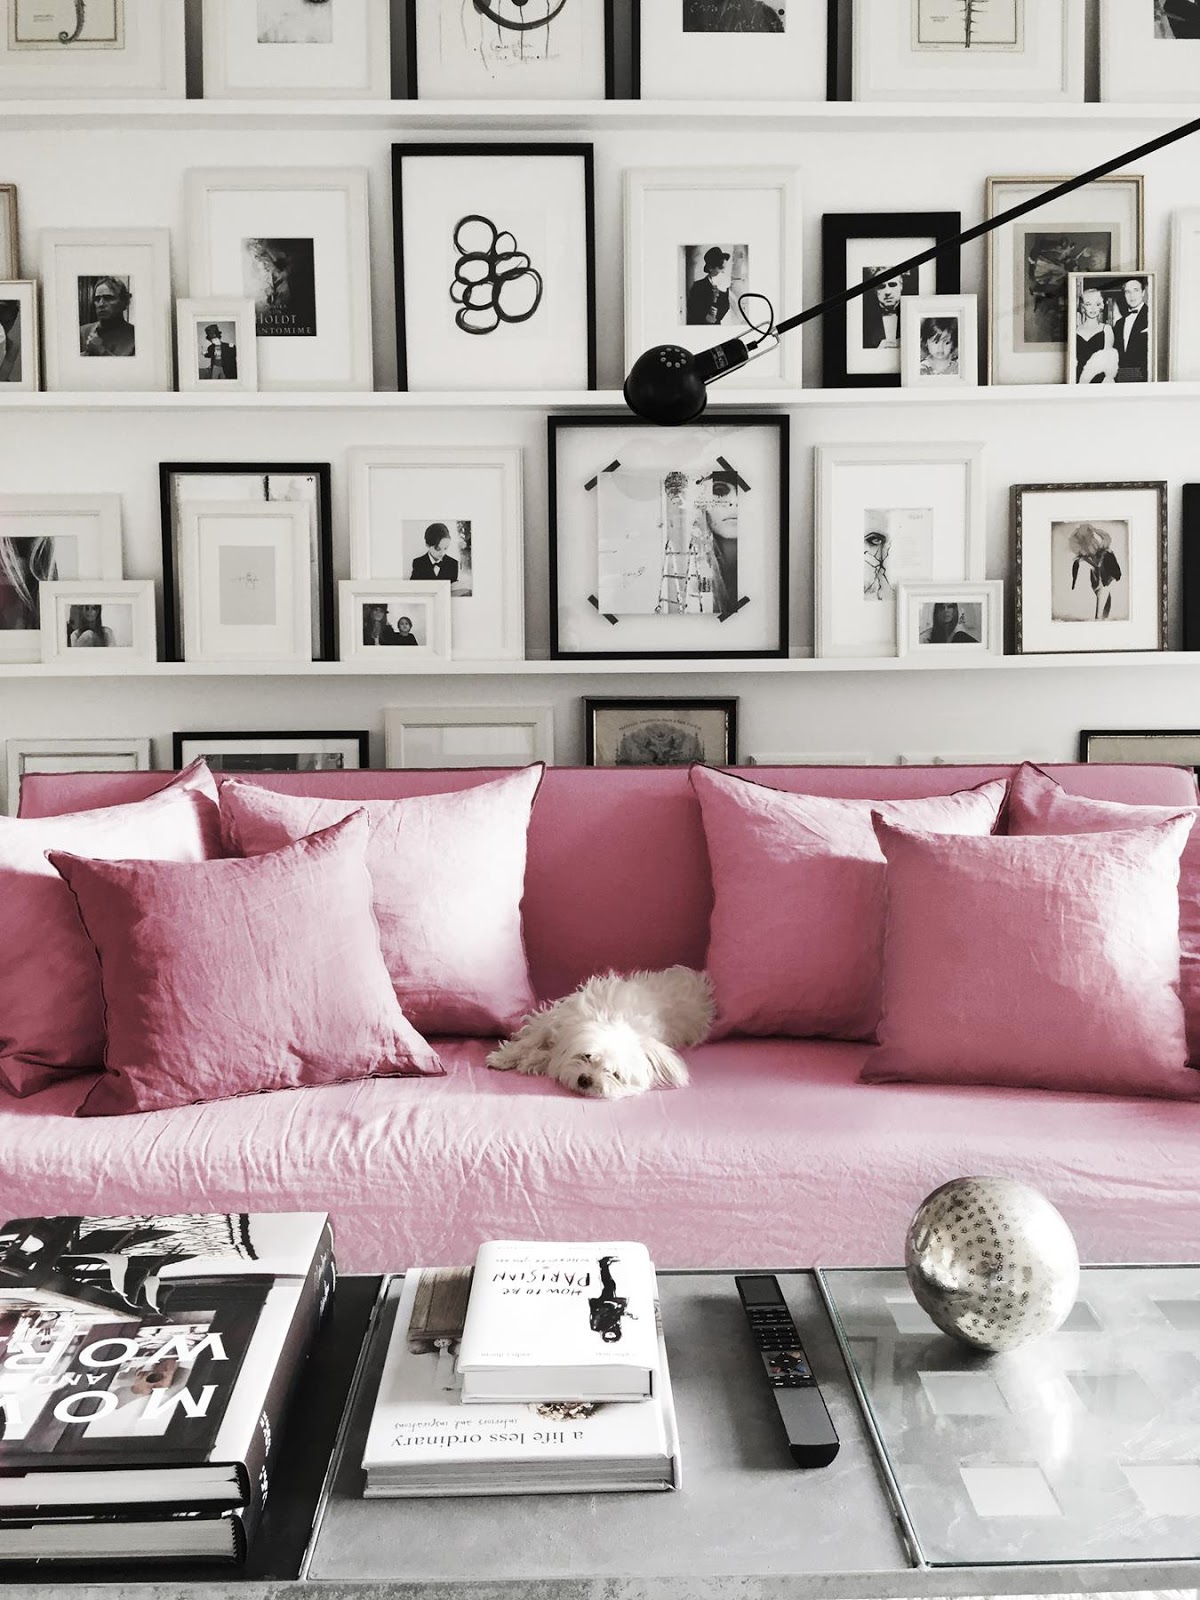 Look at this gorgeous pink sofa, isn't it an embodiment of glam and girlish decor